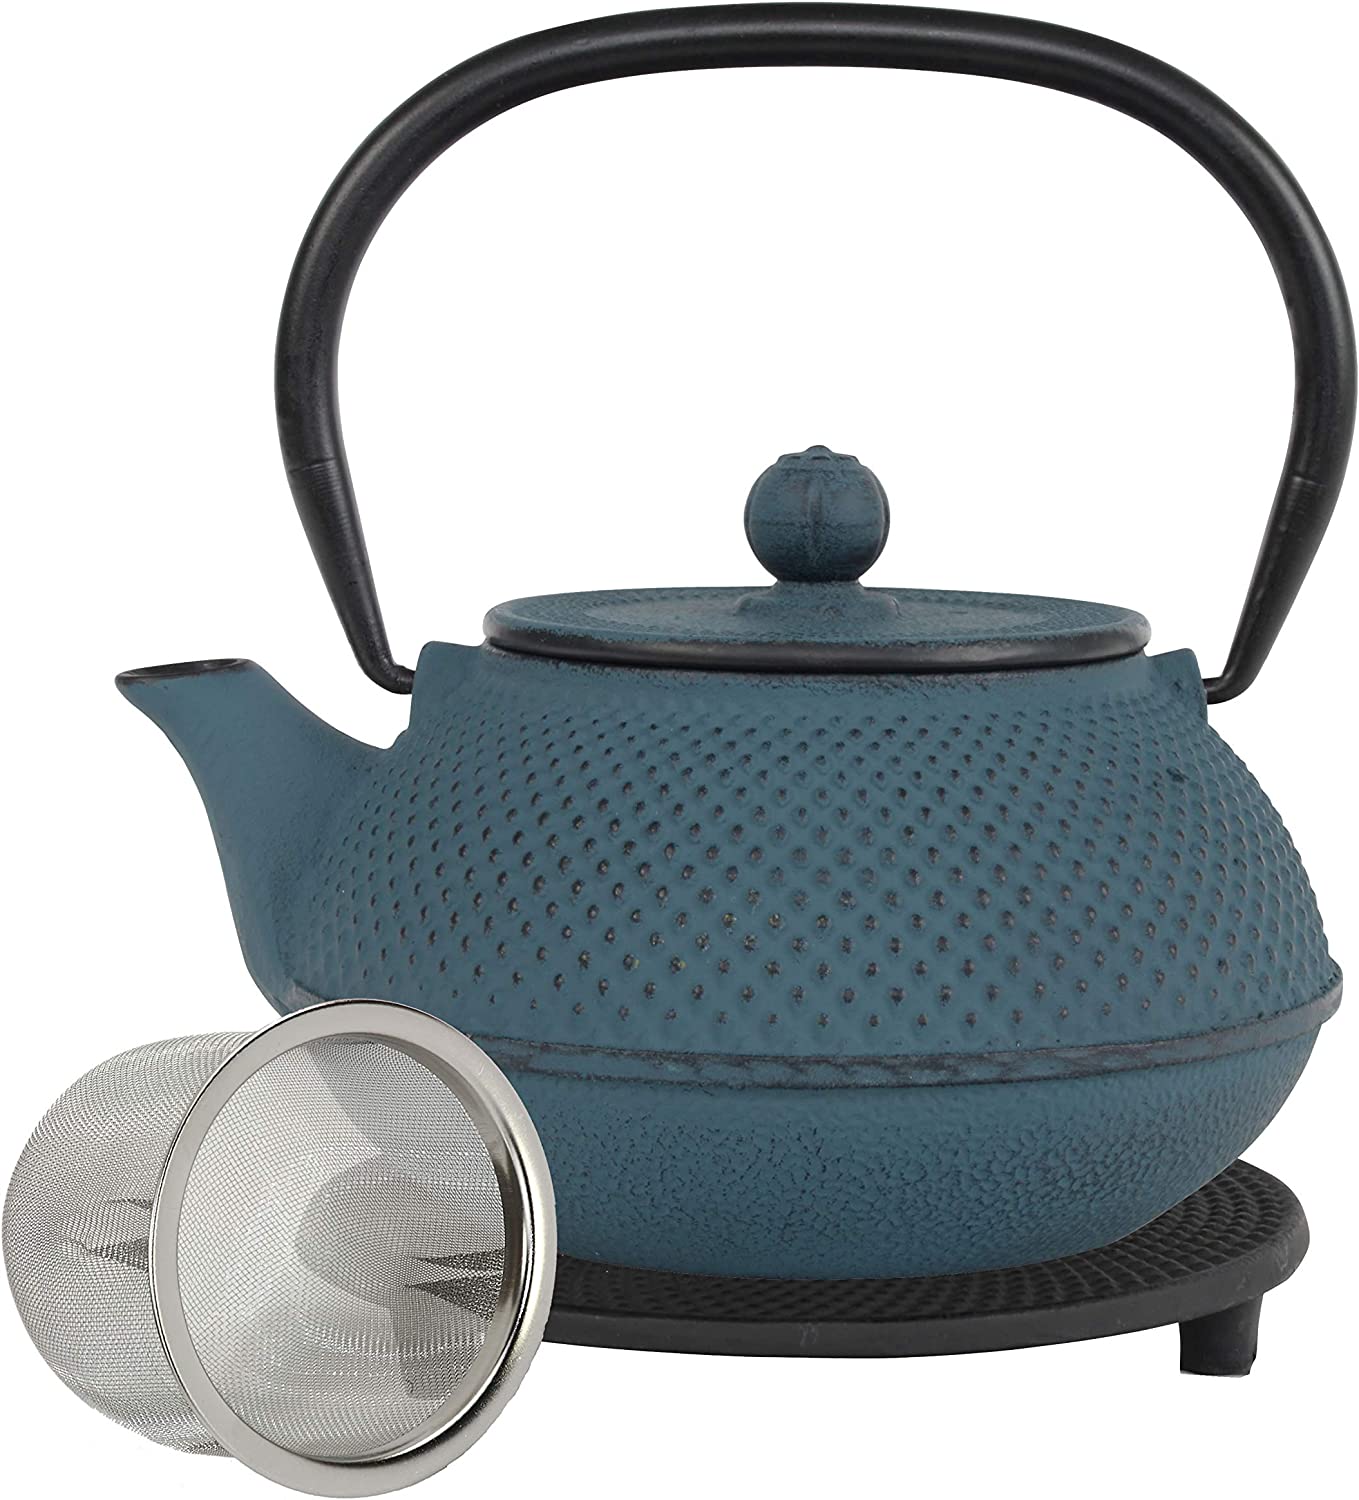 teeblume Cast Iron Teapot Arare Cast Iron Teapot with Strainer Includes Free Coaster in Black Teapot Fully Enamelled Inside Blue 900 ml